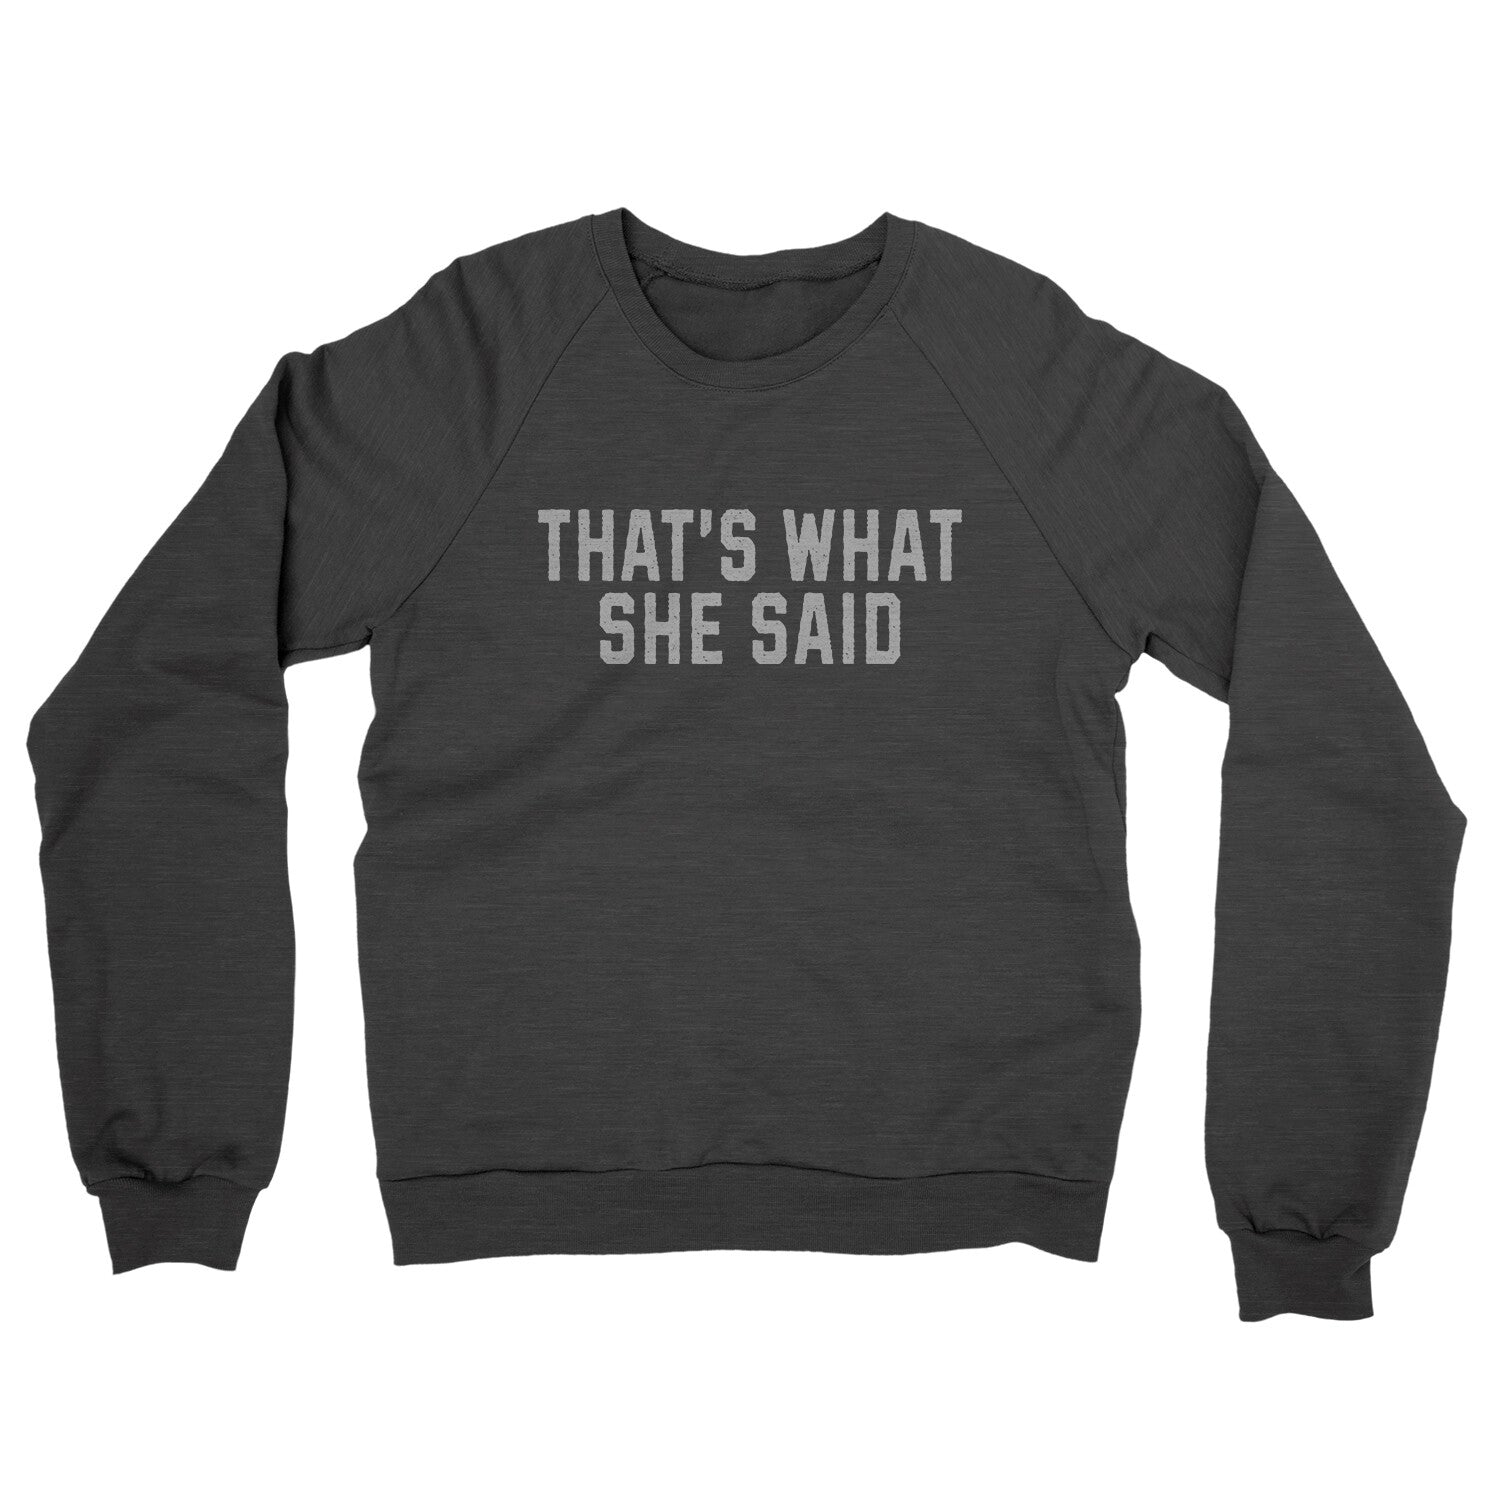 That's What She Said in Charcoal Heather Color